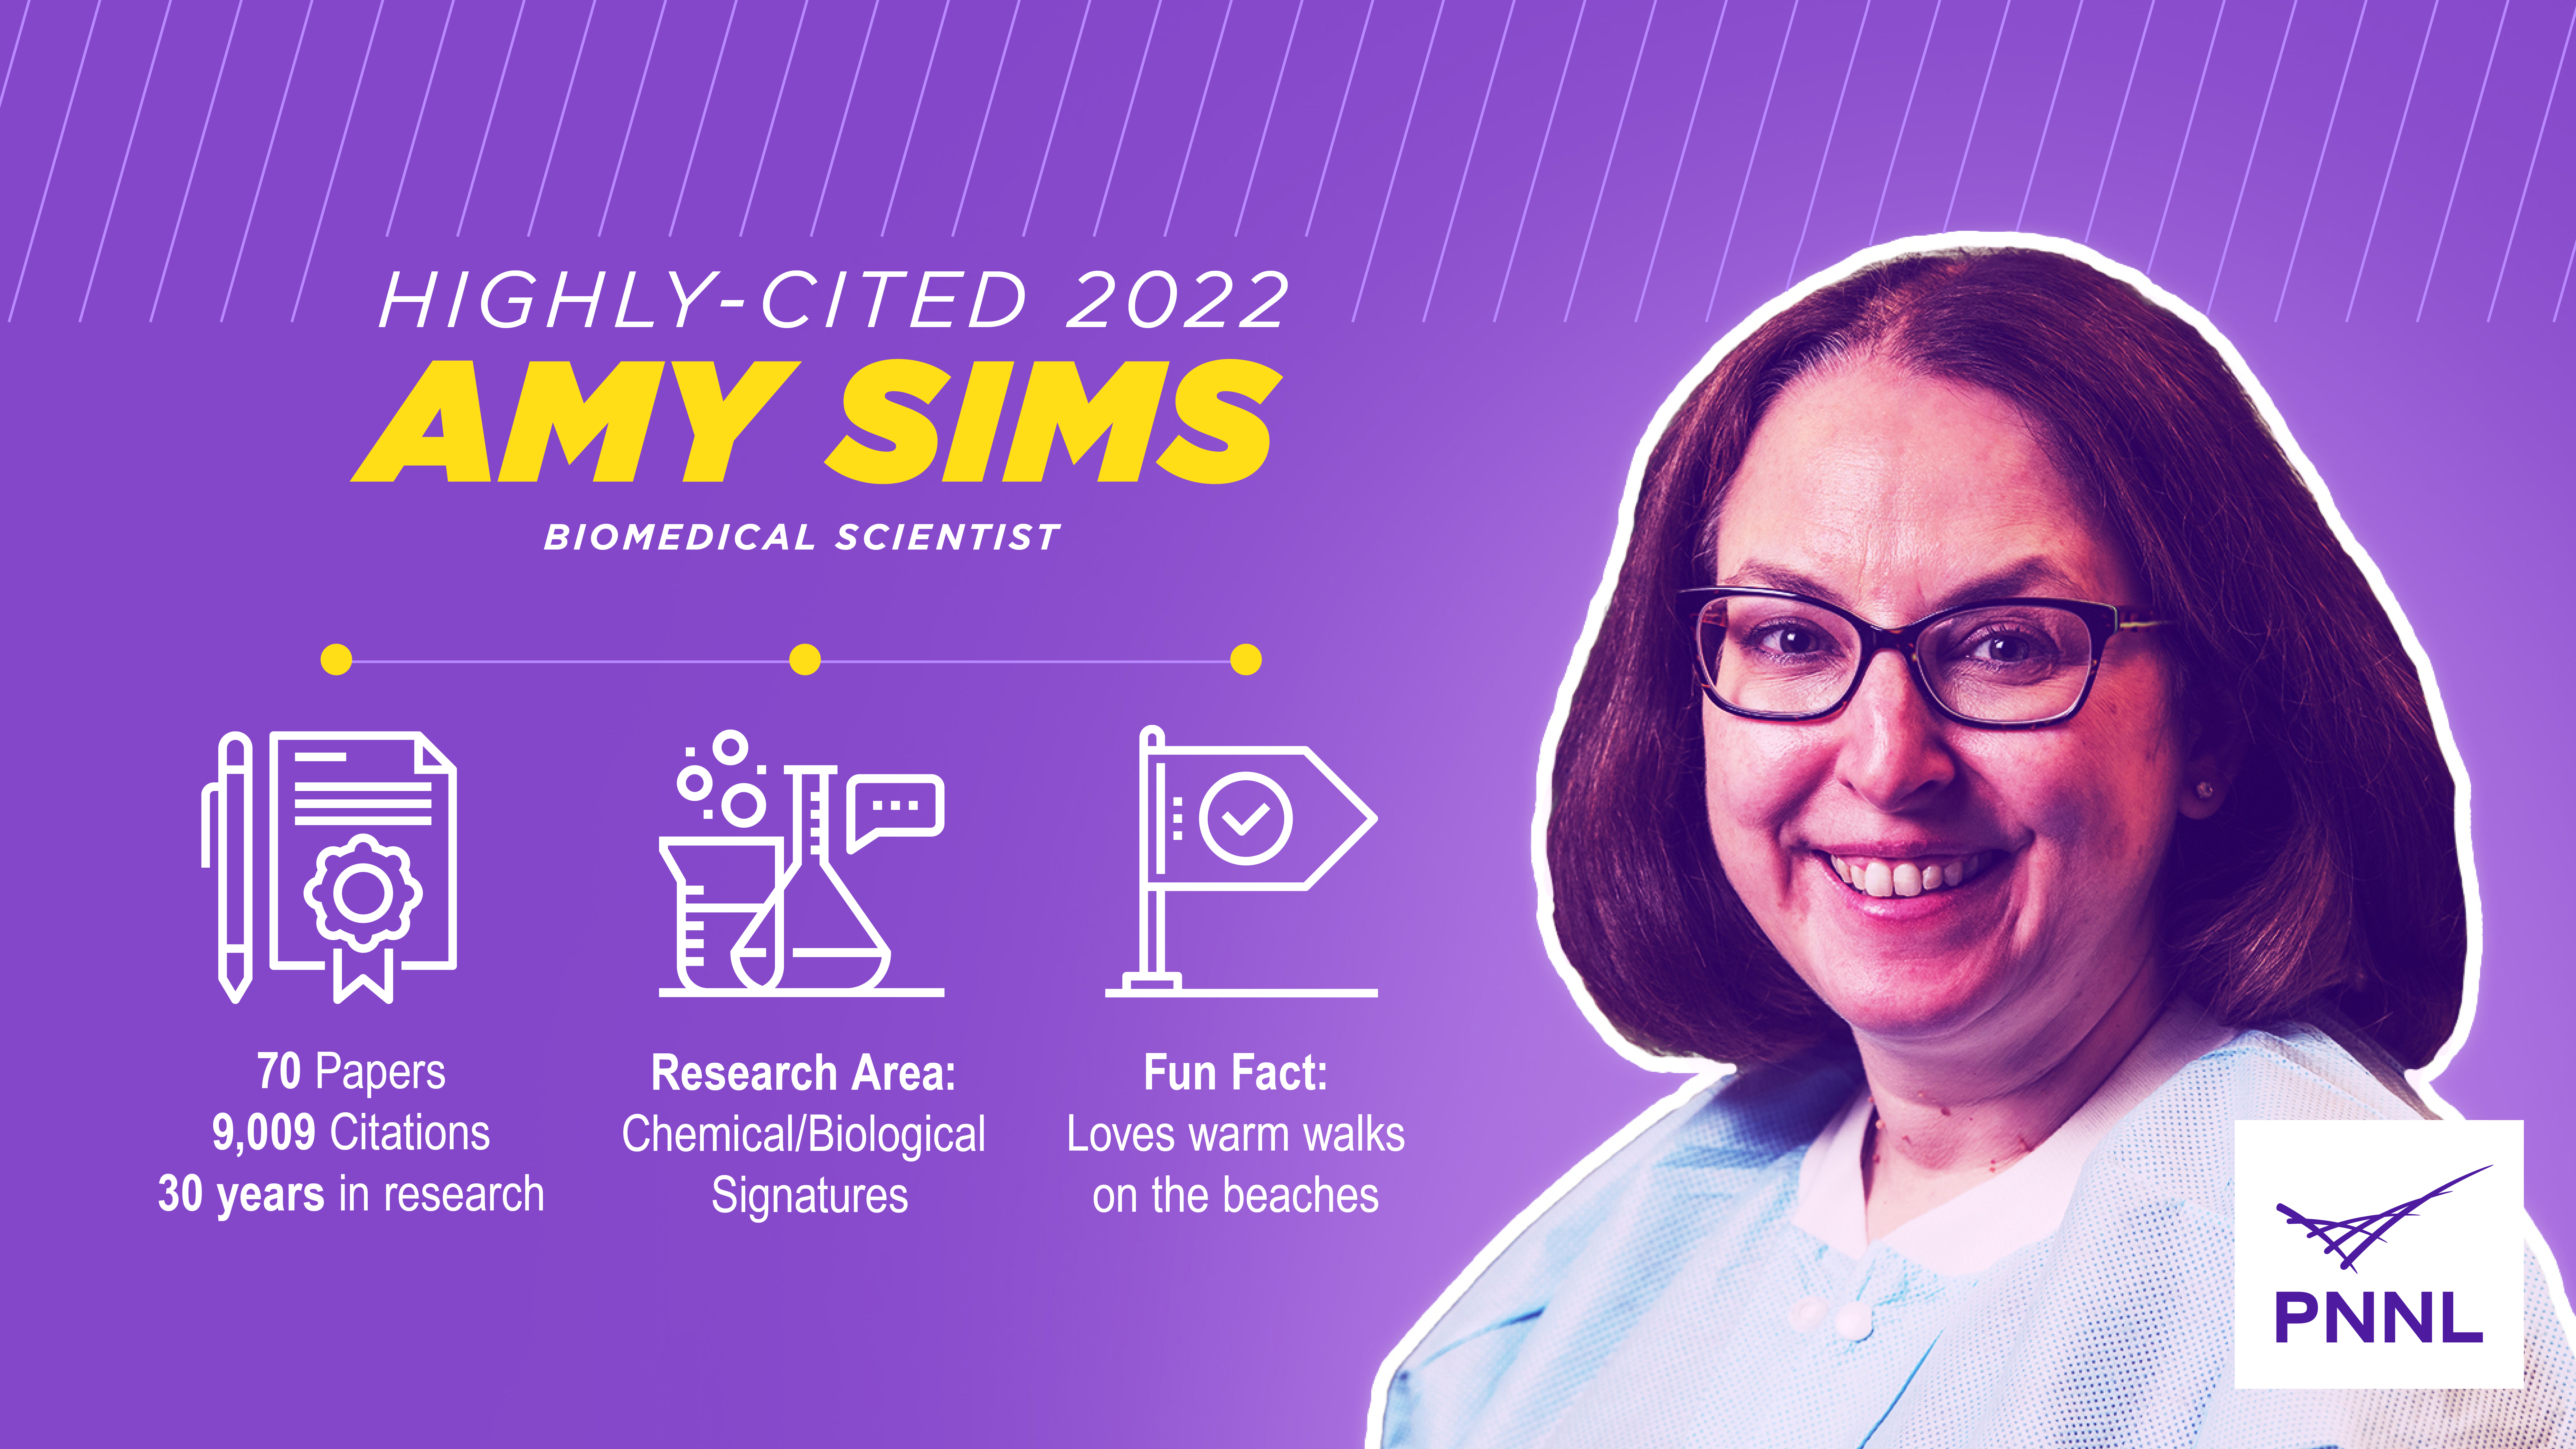 An image of Amy Sims